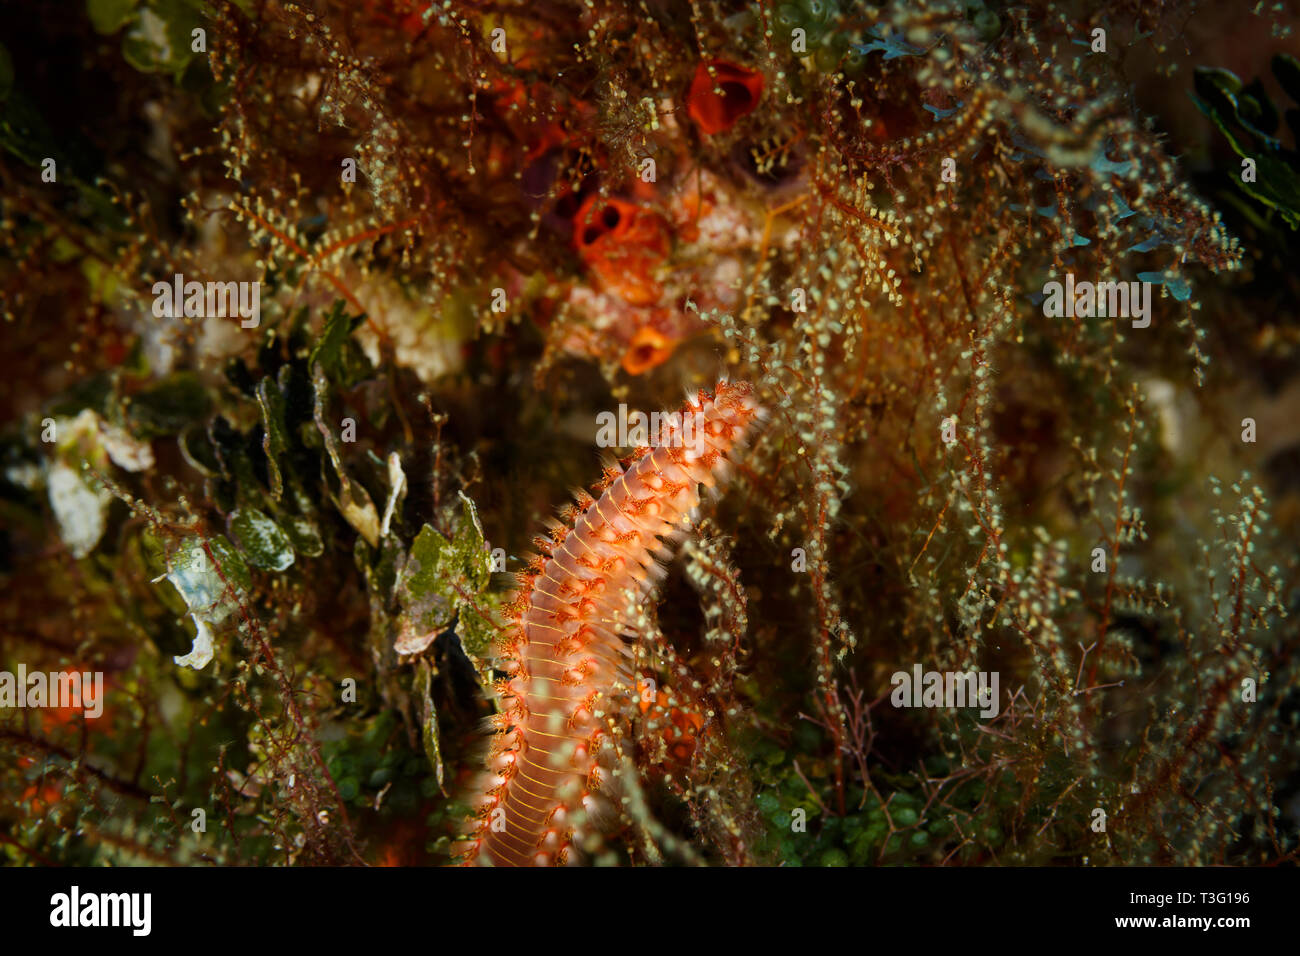 bearded Fire Worm,Hermodice carunculata , hides in tentacles of coral Stock Photo